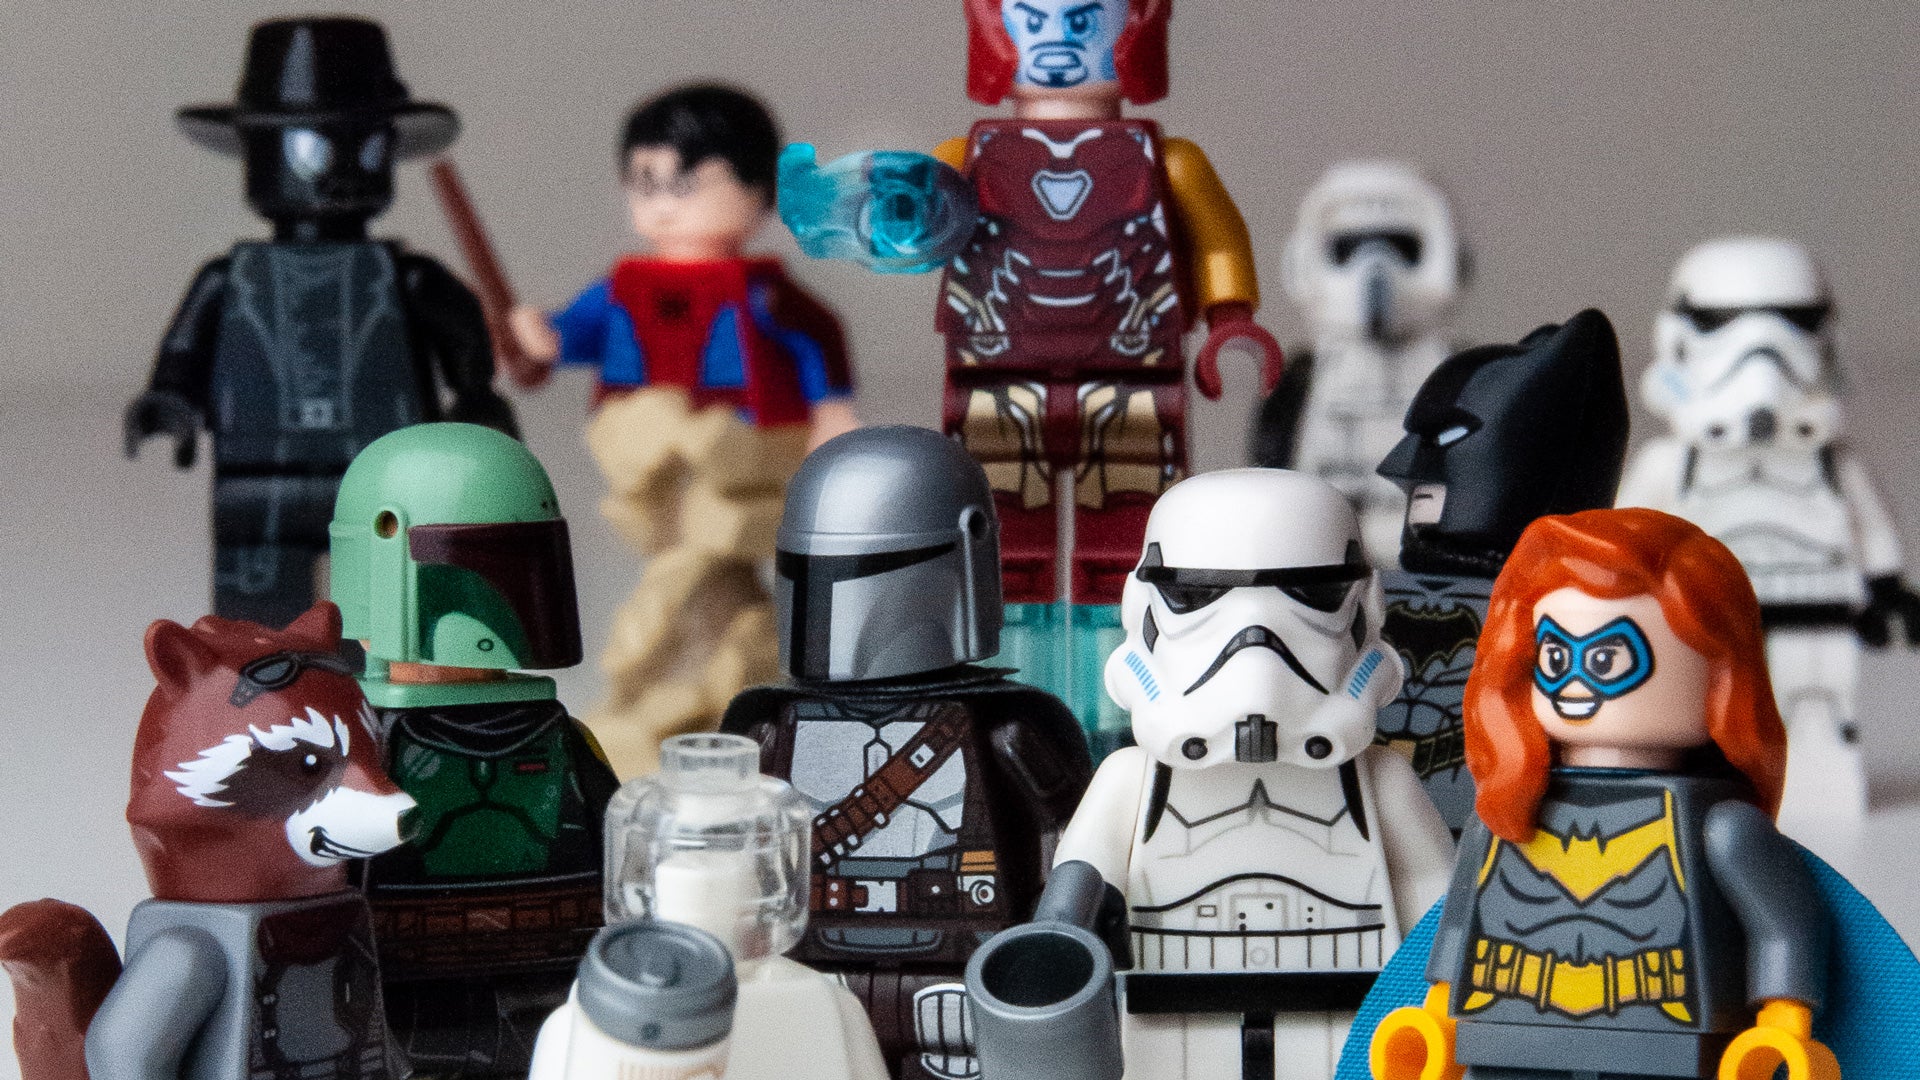 an assortment of lego minifigure characters